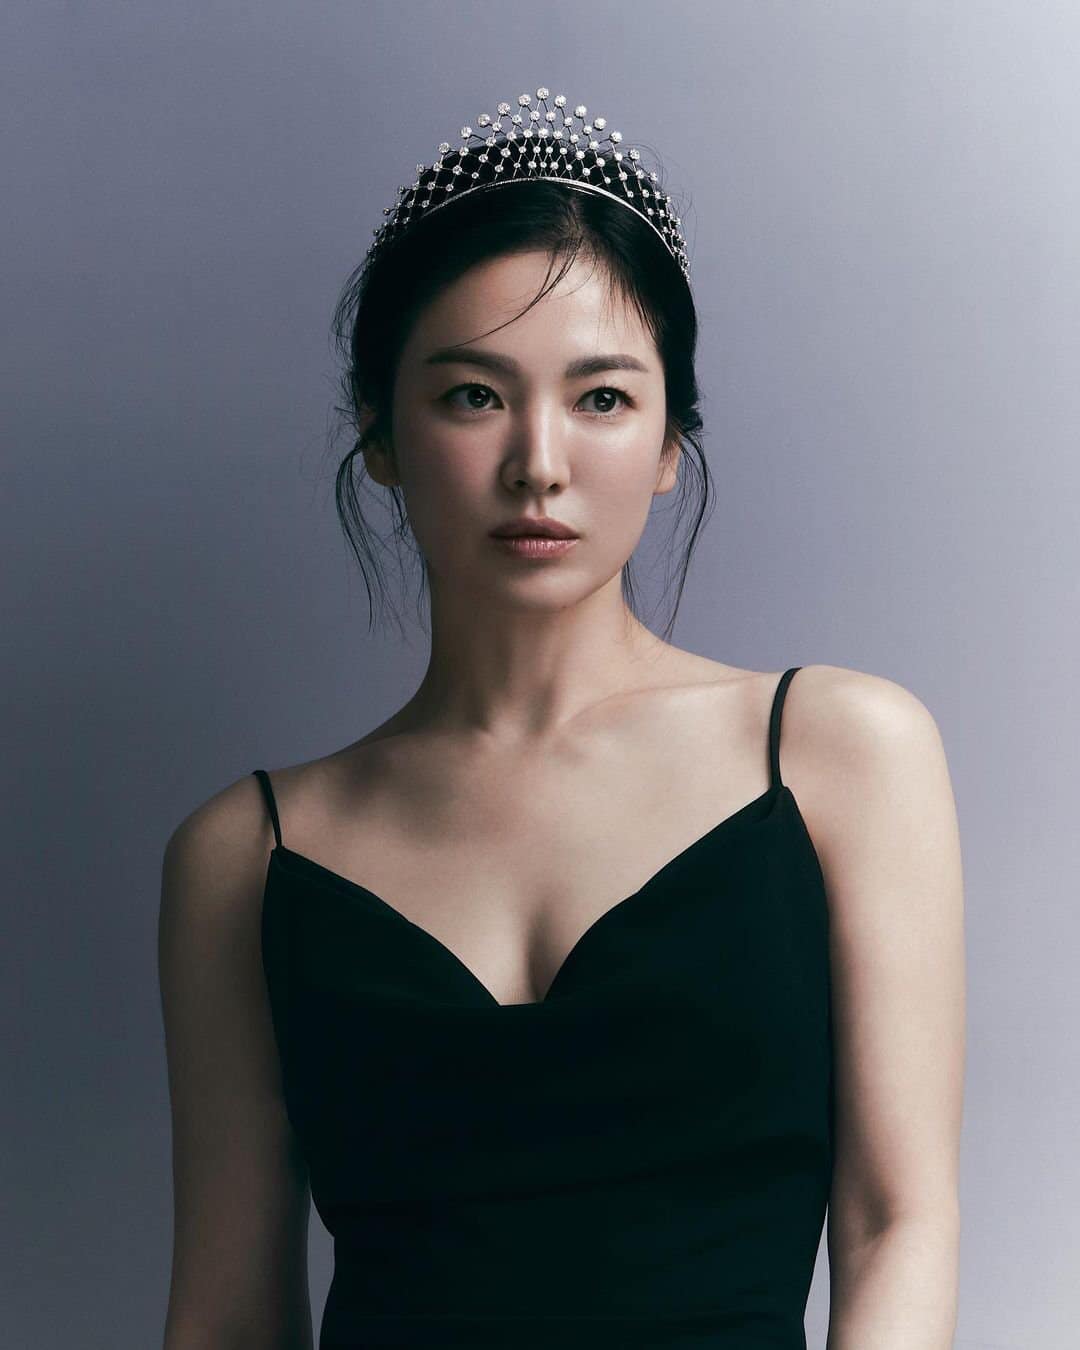 There was a big sister who gave up her role 3 times to help Song Hye Kyo win big: Rejecting even a good blockbuster, fortunately a successful career is not inferior to juniors - Photo 1.